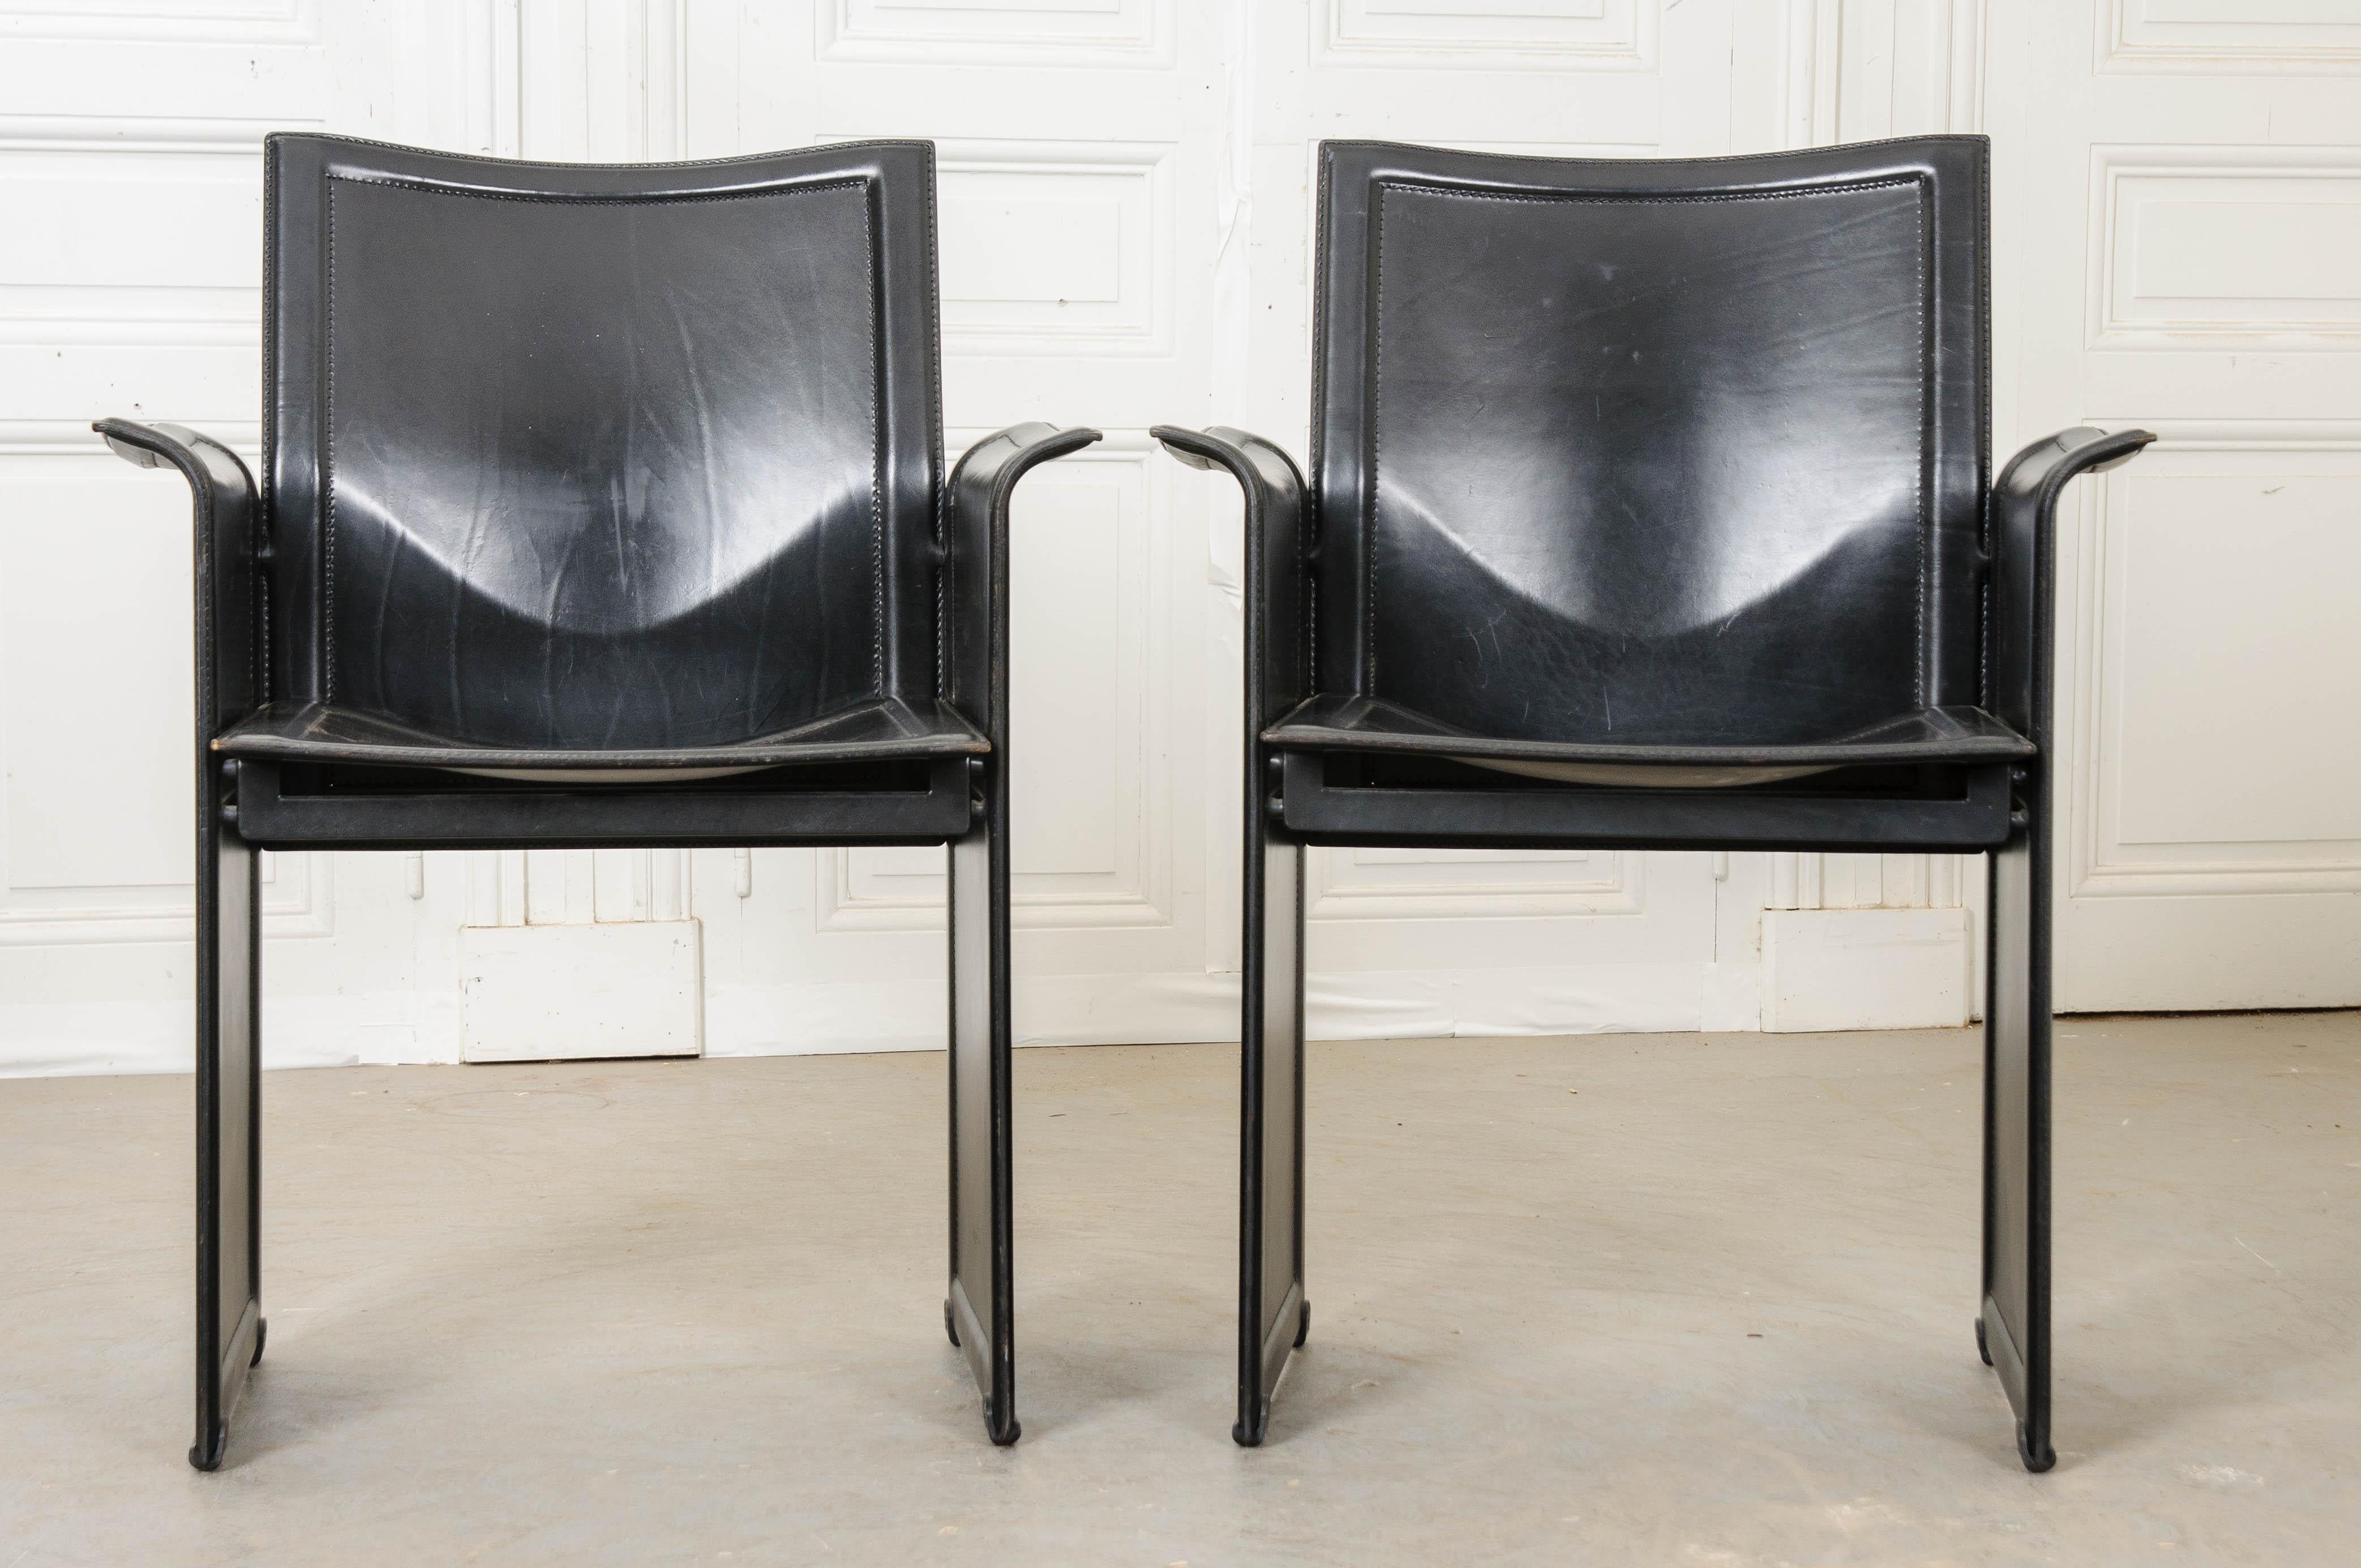 This stylish pair of black leather armchairs was made in Italy by Tito Agnoli for Matteo Grassi, circa 1970. The chairs’ design has a Mid-Century Modern influence with clean lines and a unibody form. Made totally of leather with an obscured and